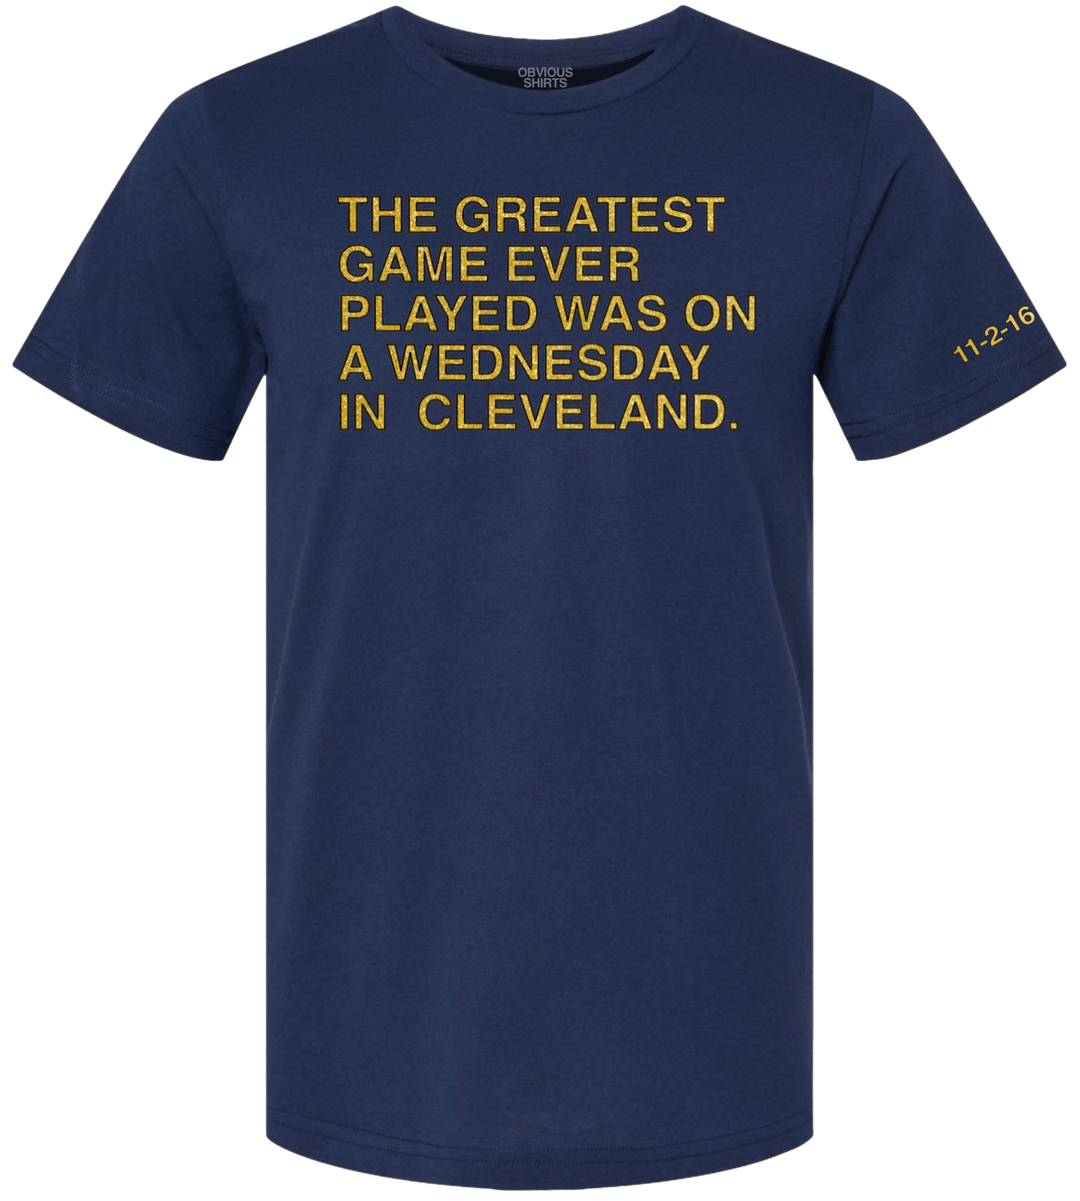 THE GREATEST GAME EVER PLAYED. (NAVY ANNIVERSARY EDITION) - OBVIOUS SHIRTS